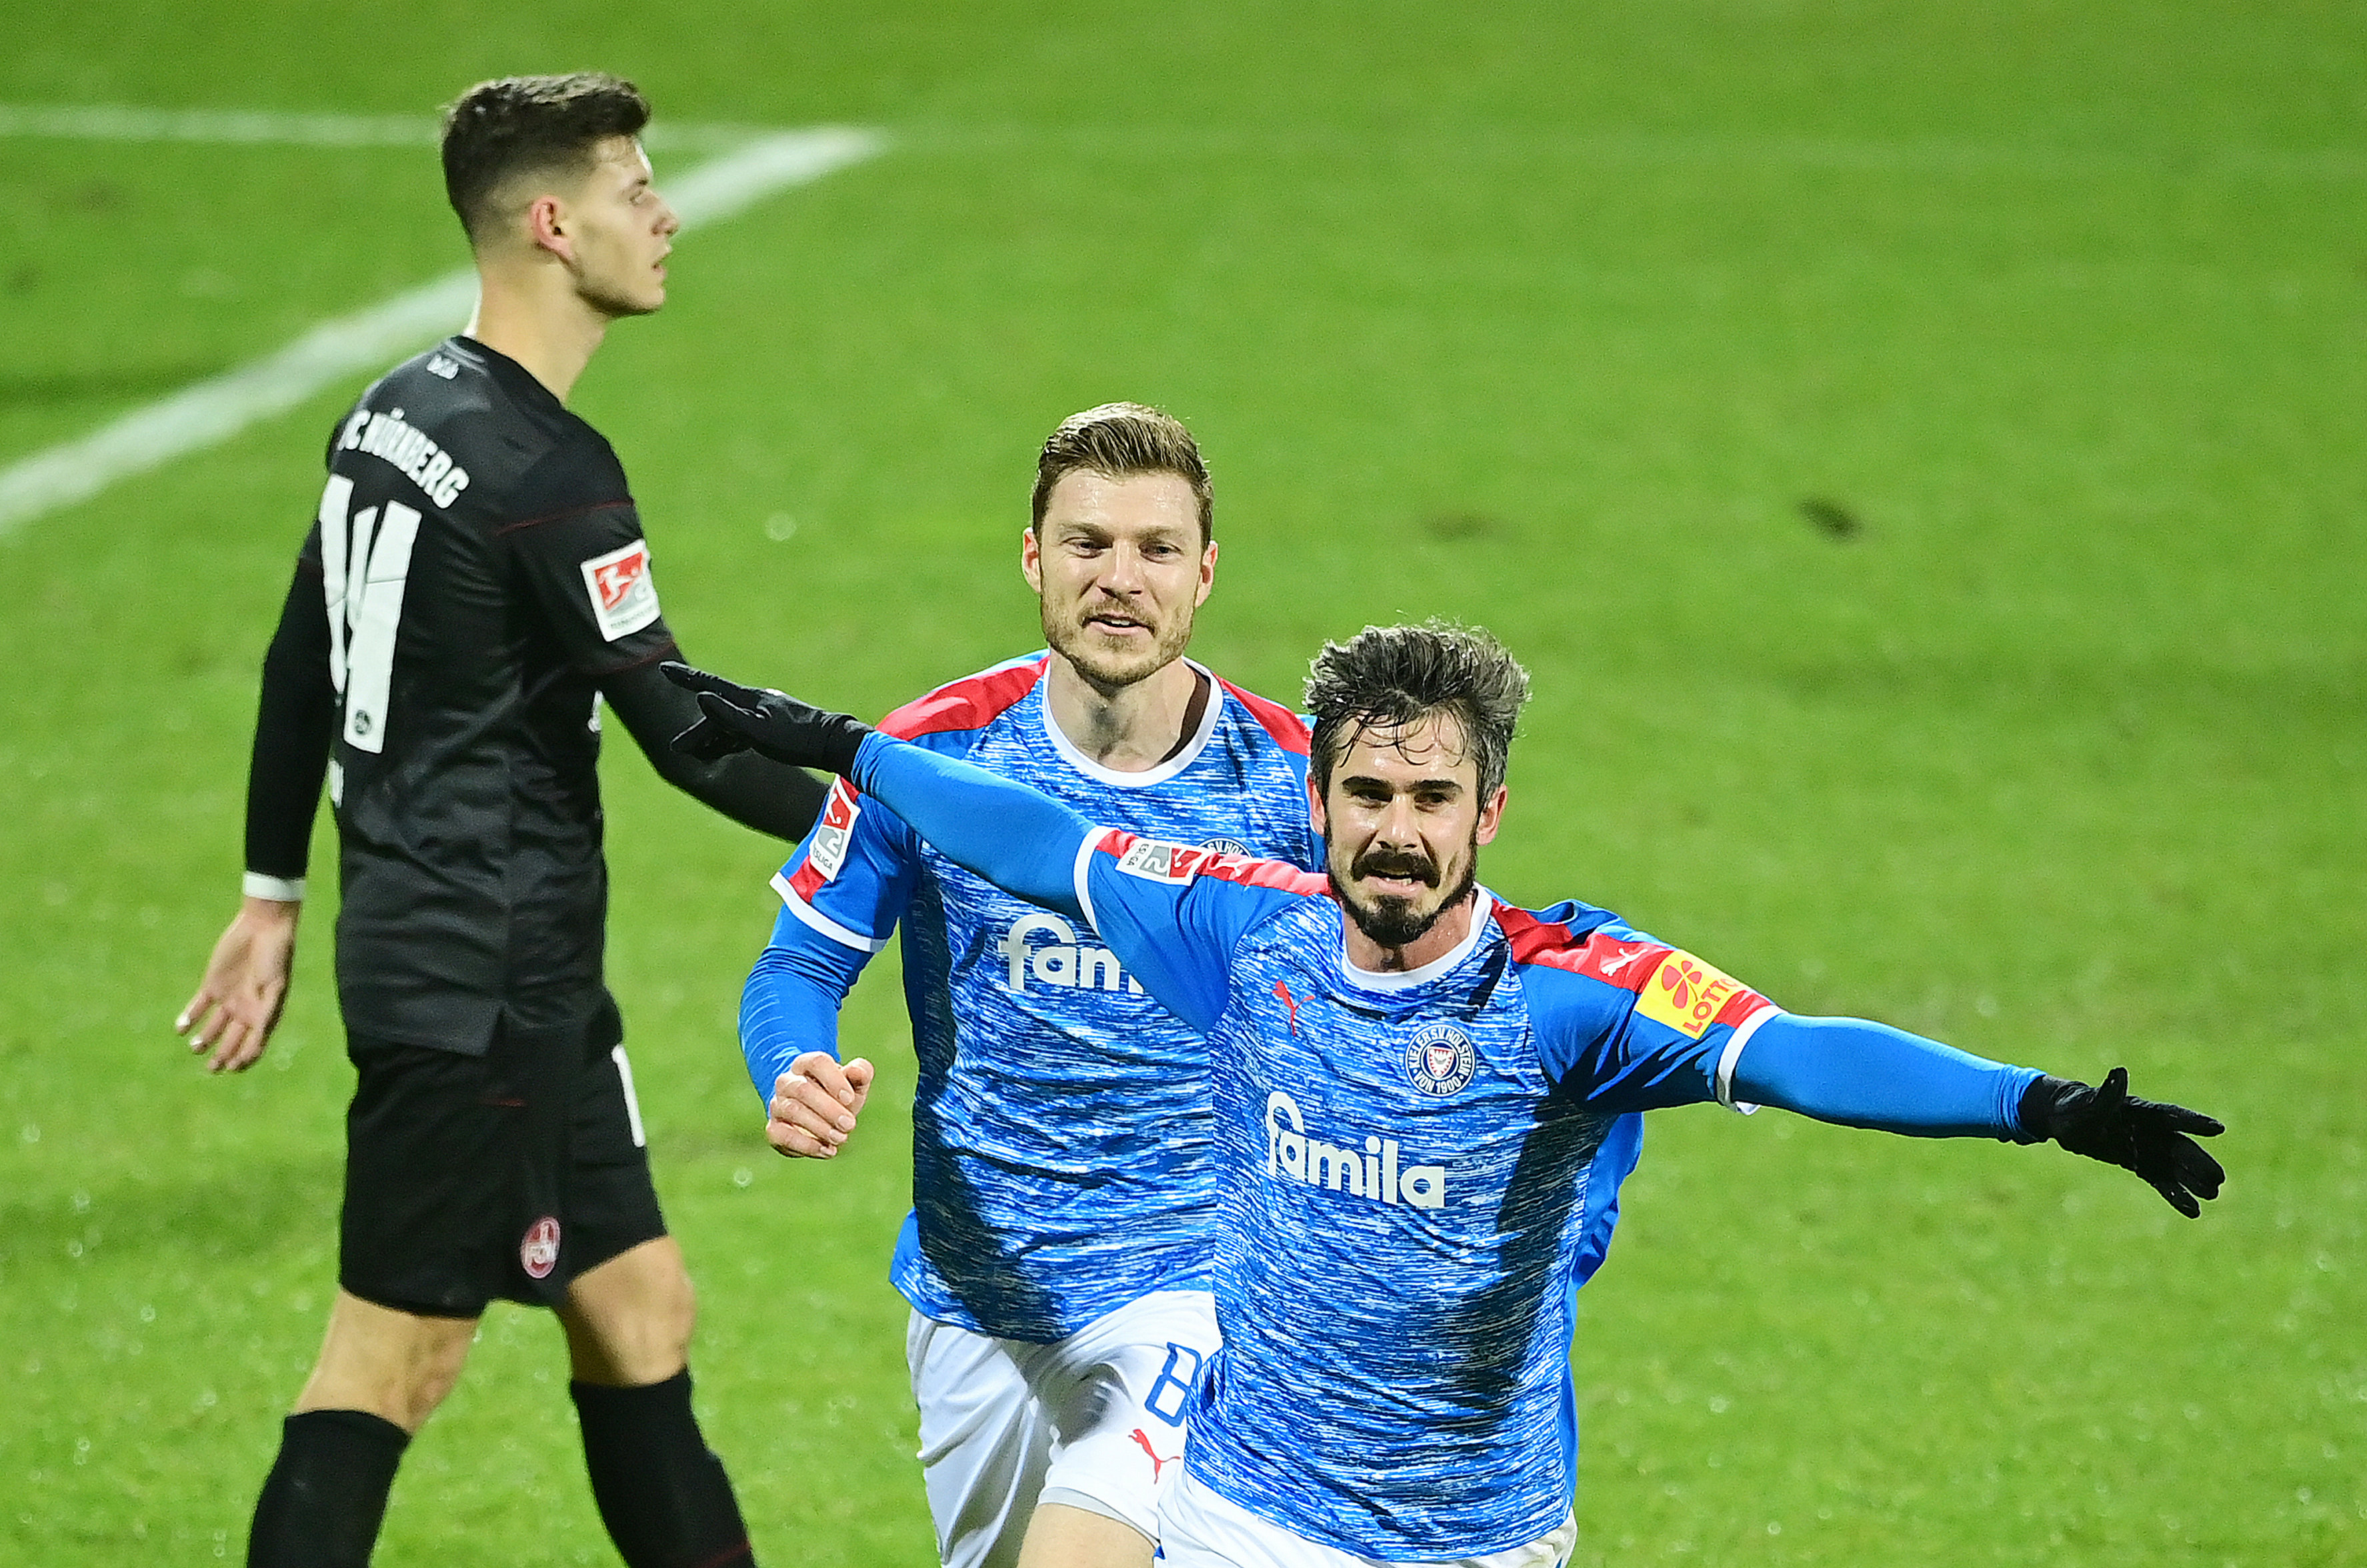 Fin Bartels and Holstein Kiel have had an excellent season, with the former St. Pauli man performing strongly, scoring three goals himself and making another four.